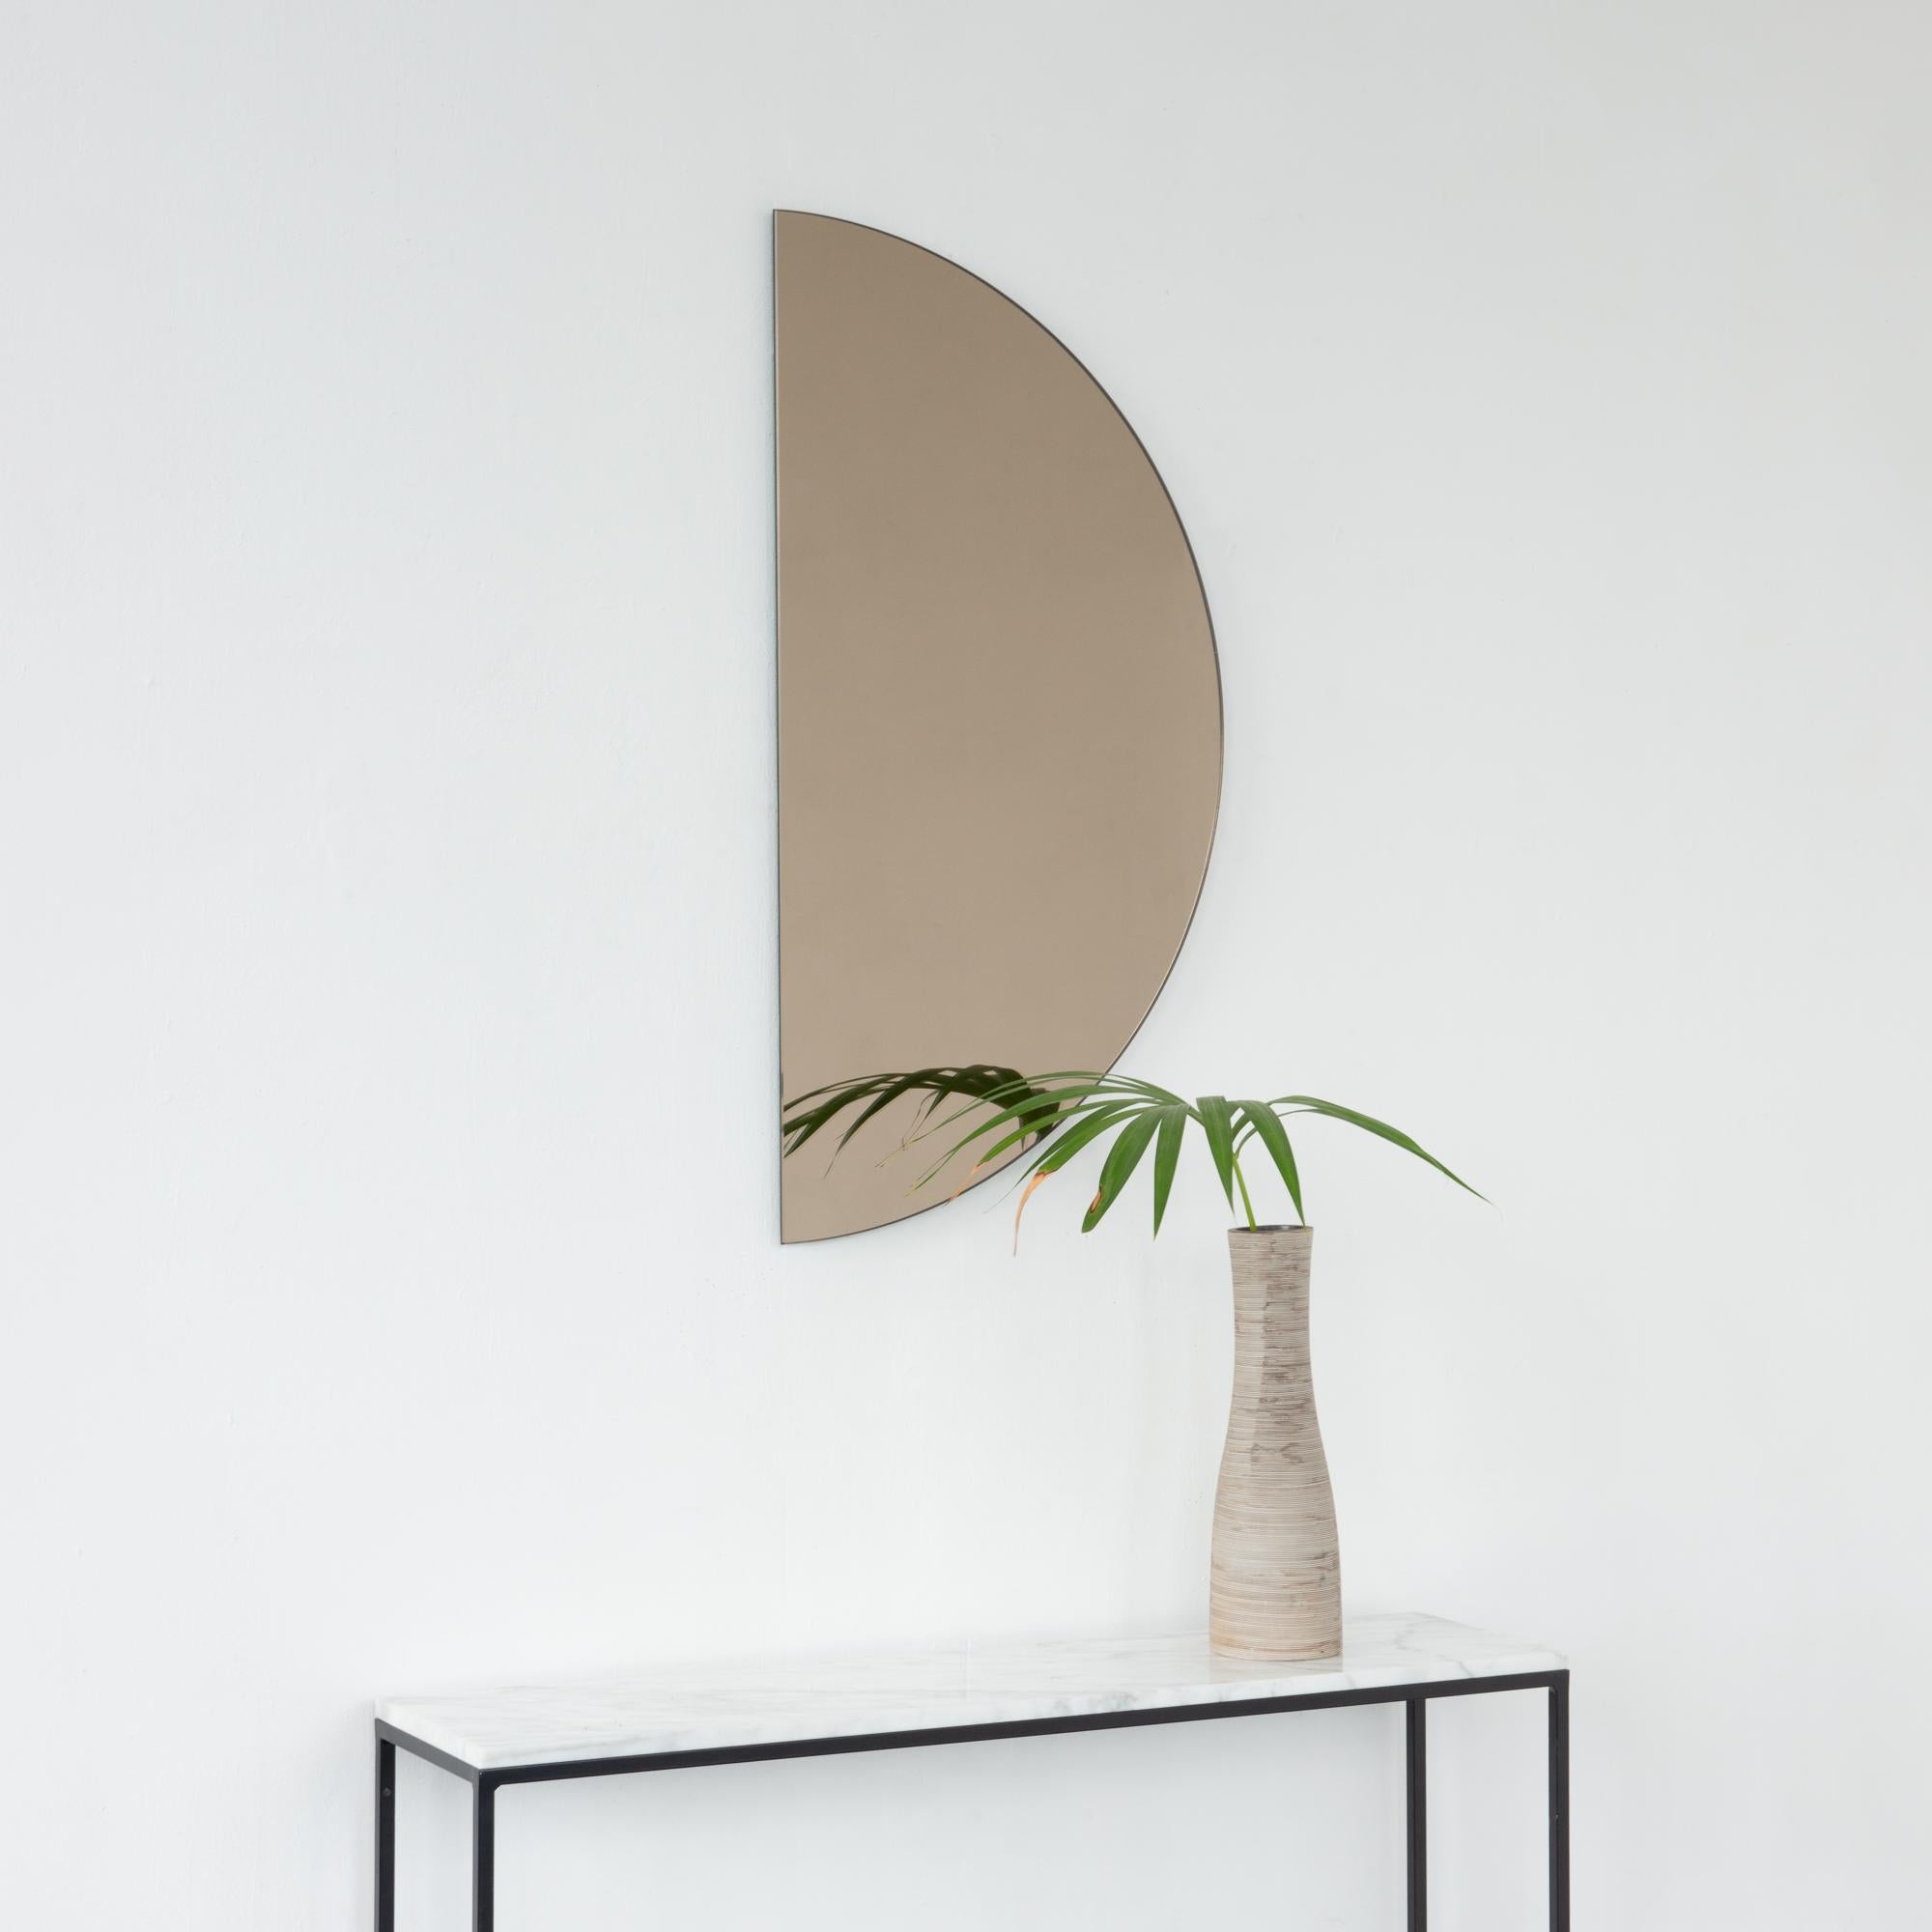 Minimalist half-moon Luna™ bronze tinted frameless mirror with a floating effect. Fitted with a quality hanging system for a flexible installation in 4 different directions. Designed and made in London, UK. 

Our mirrors are designed with an